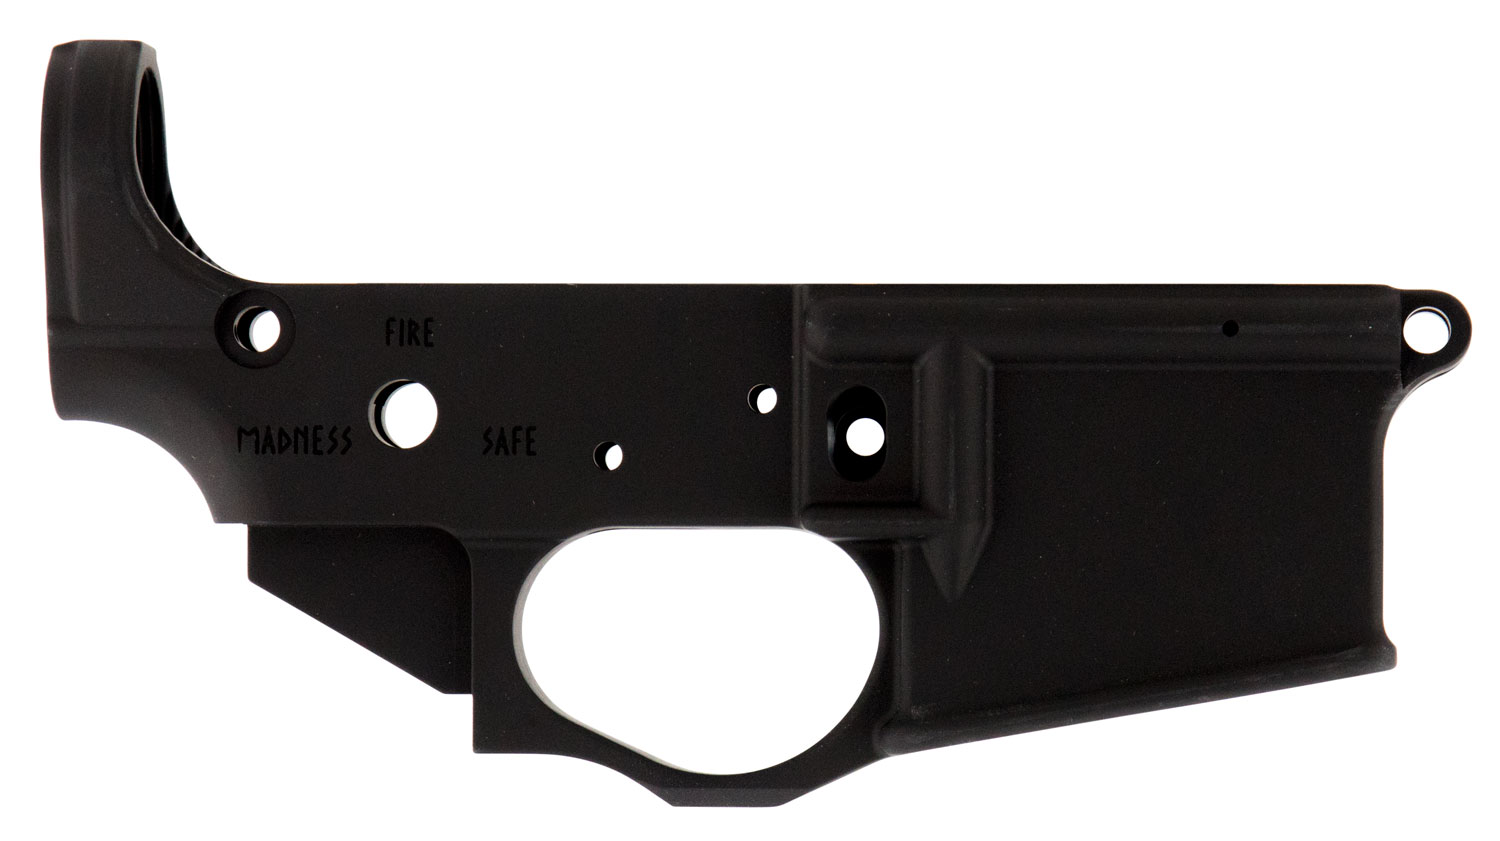 Spikes STLS031 Viking Stripped Lower Receiver Multi-Caliber 7075-T6 Aluminum Black Anodized for AR-15